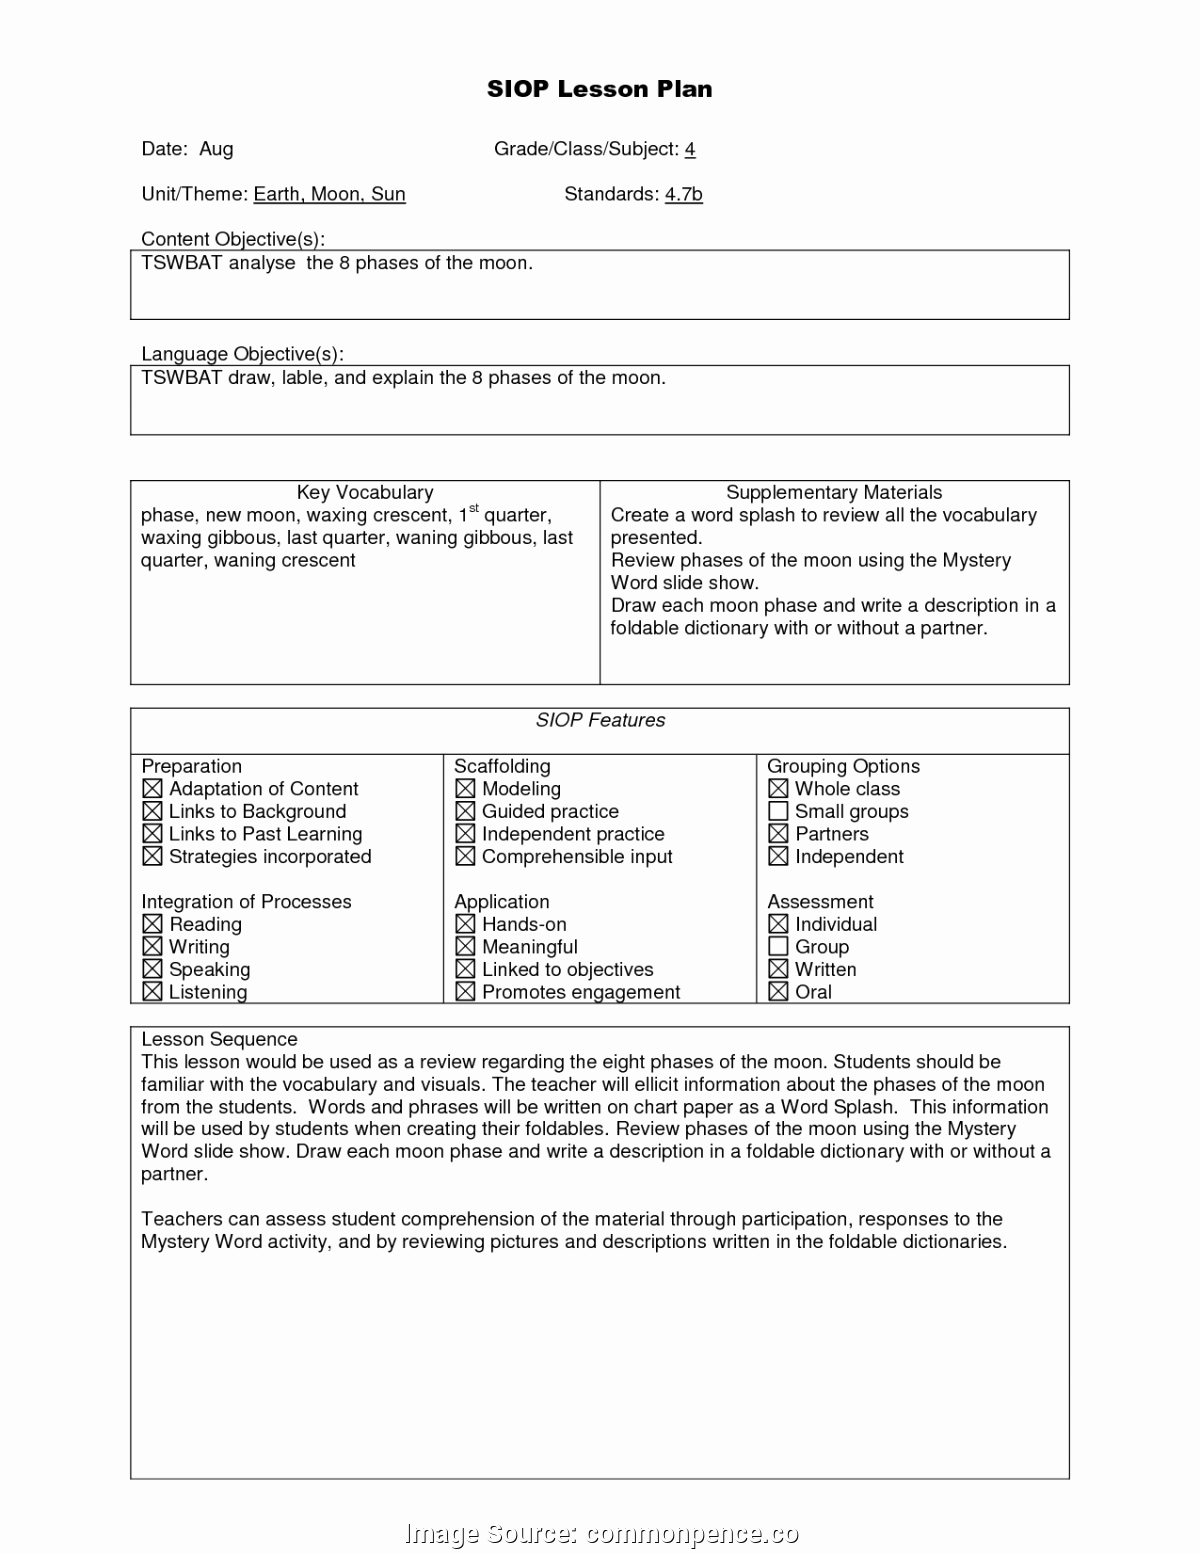 Siop Lesson Plan Template 1 Luxury Regular Natural Science Lesson Plans Grade 5 5 E Lesson